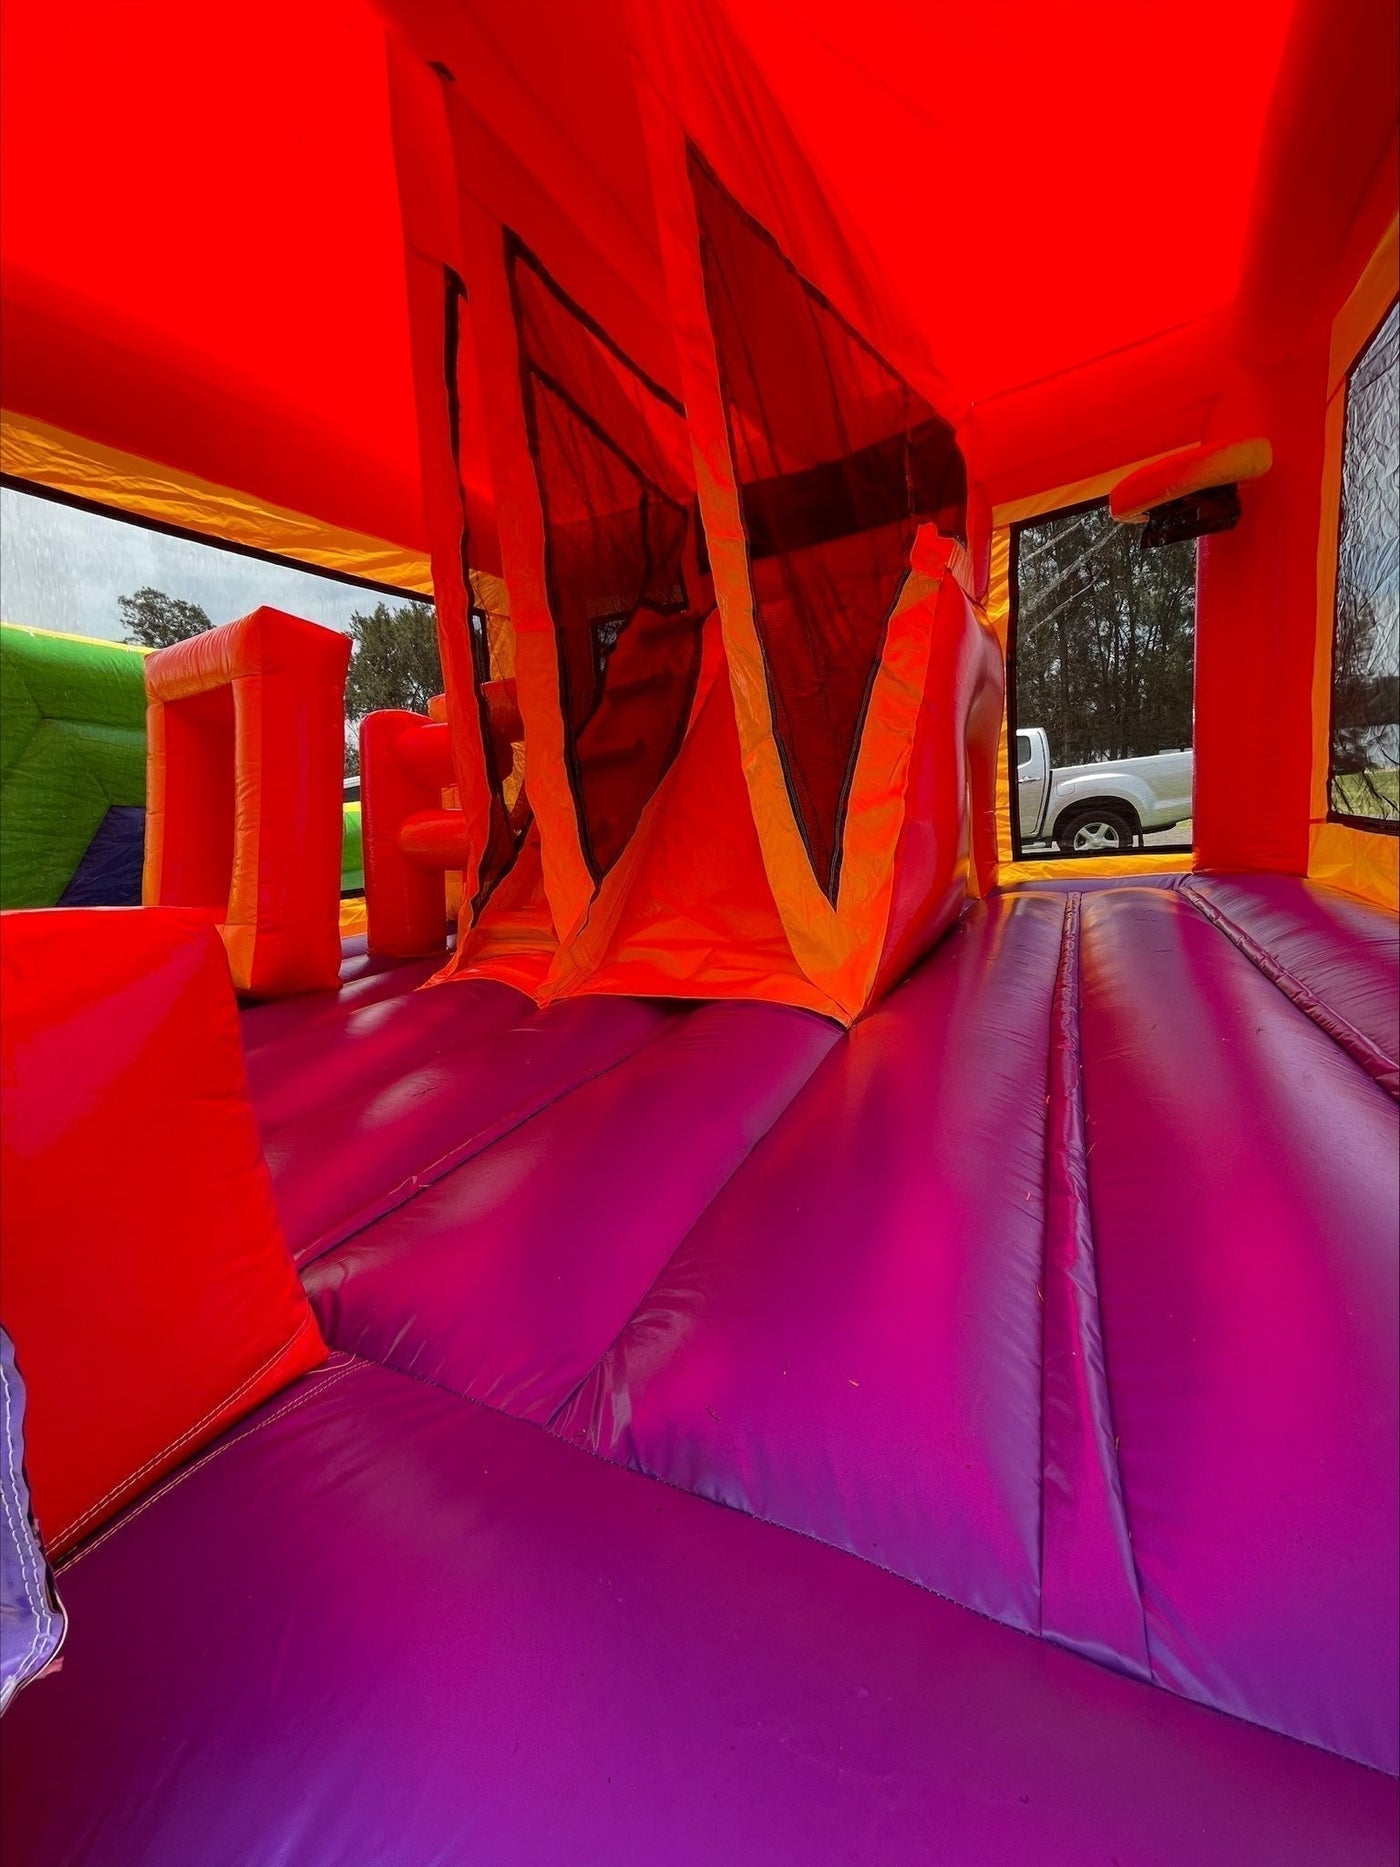 Dora Extra Large Obstacle Combo Jumping Castle